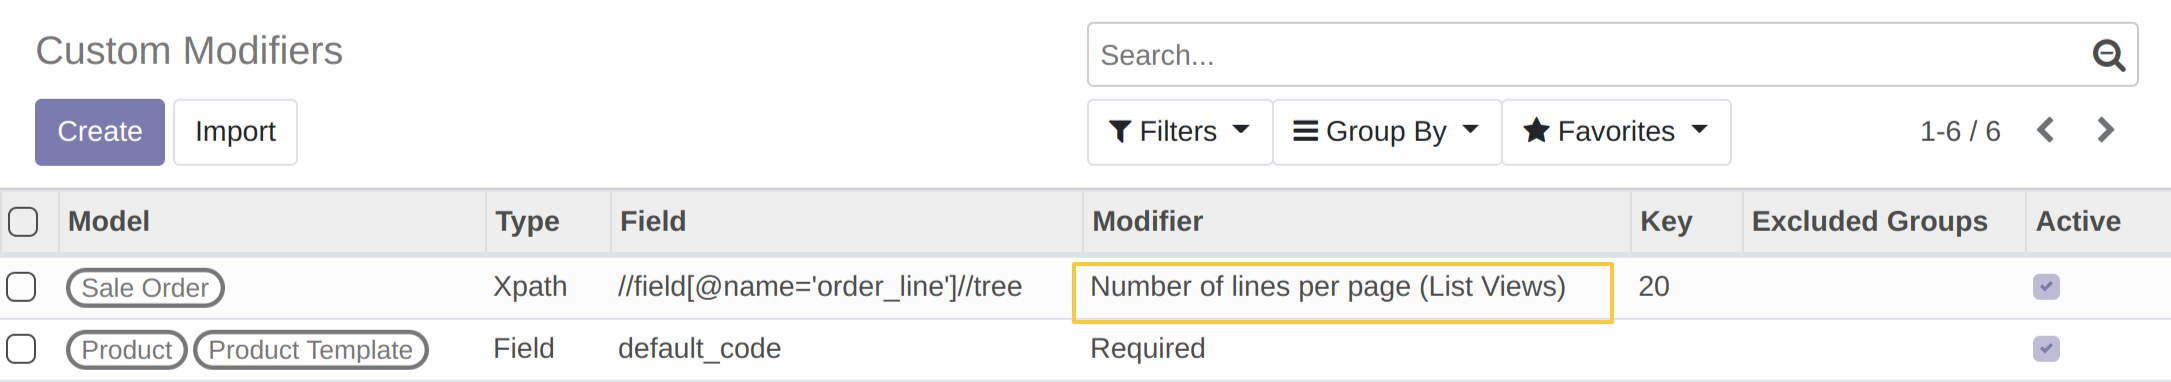 Number of lines per Page Modifier